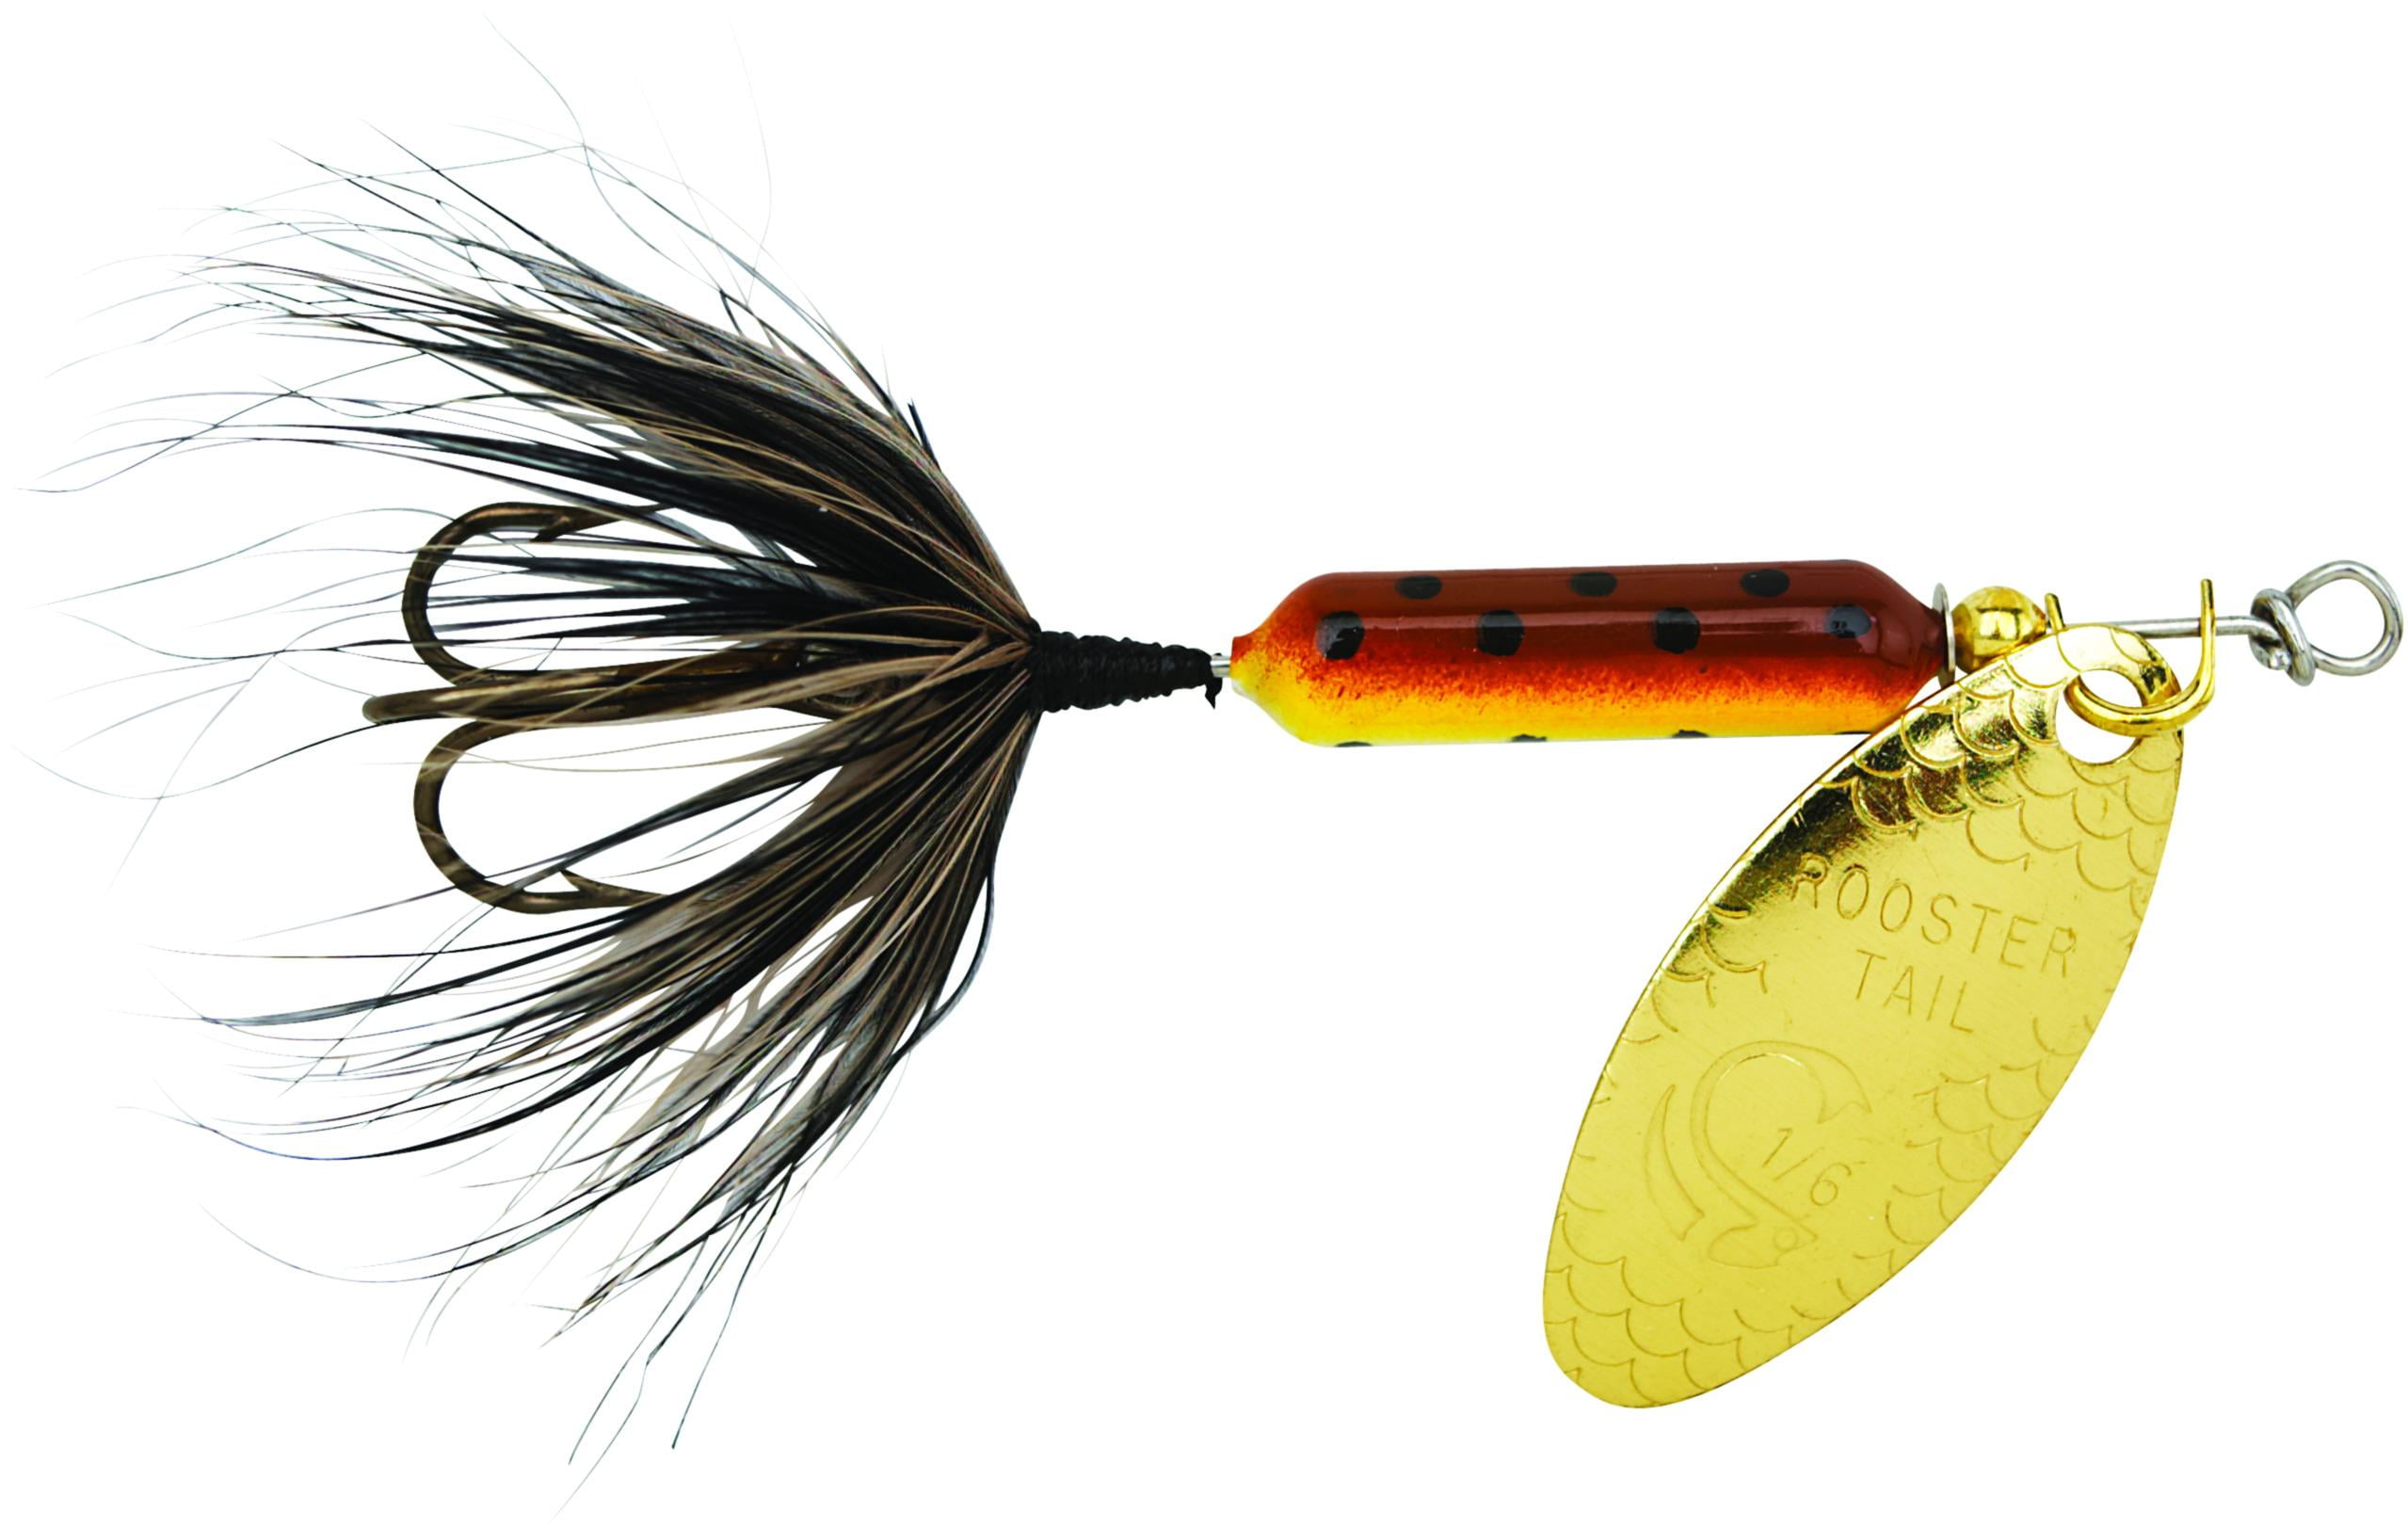 Yakima Bait Worden's Original Rooster Tail, Inline Spinnerbait Fishing  Lure, Brown Trout, 1/24 oz.